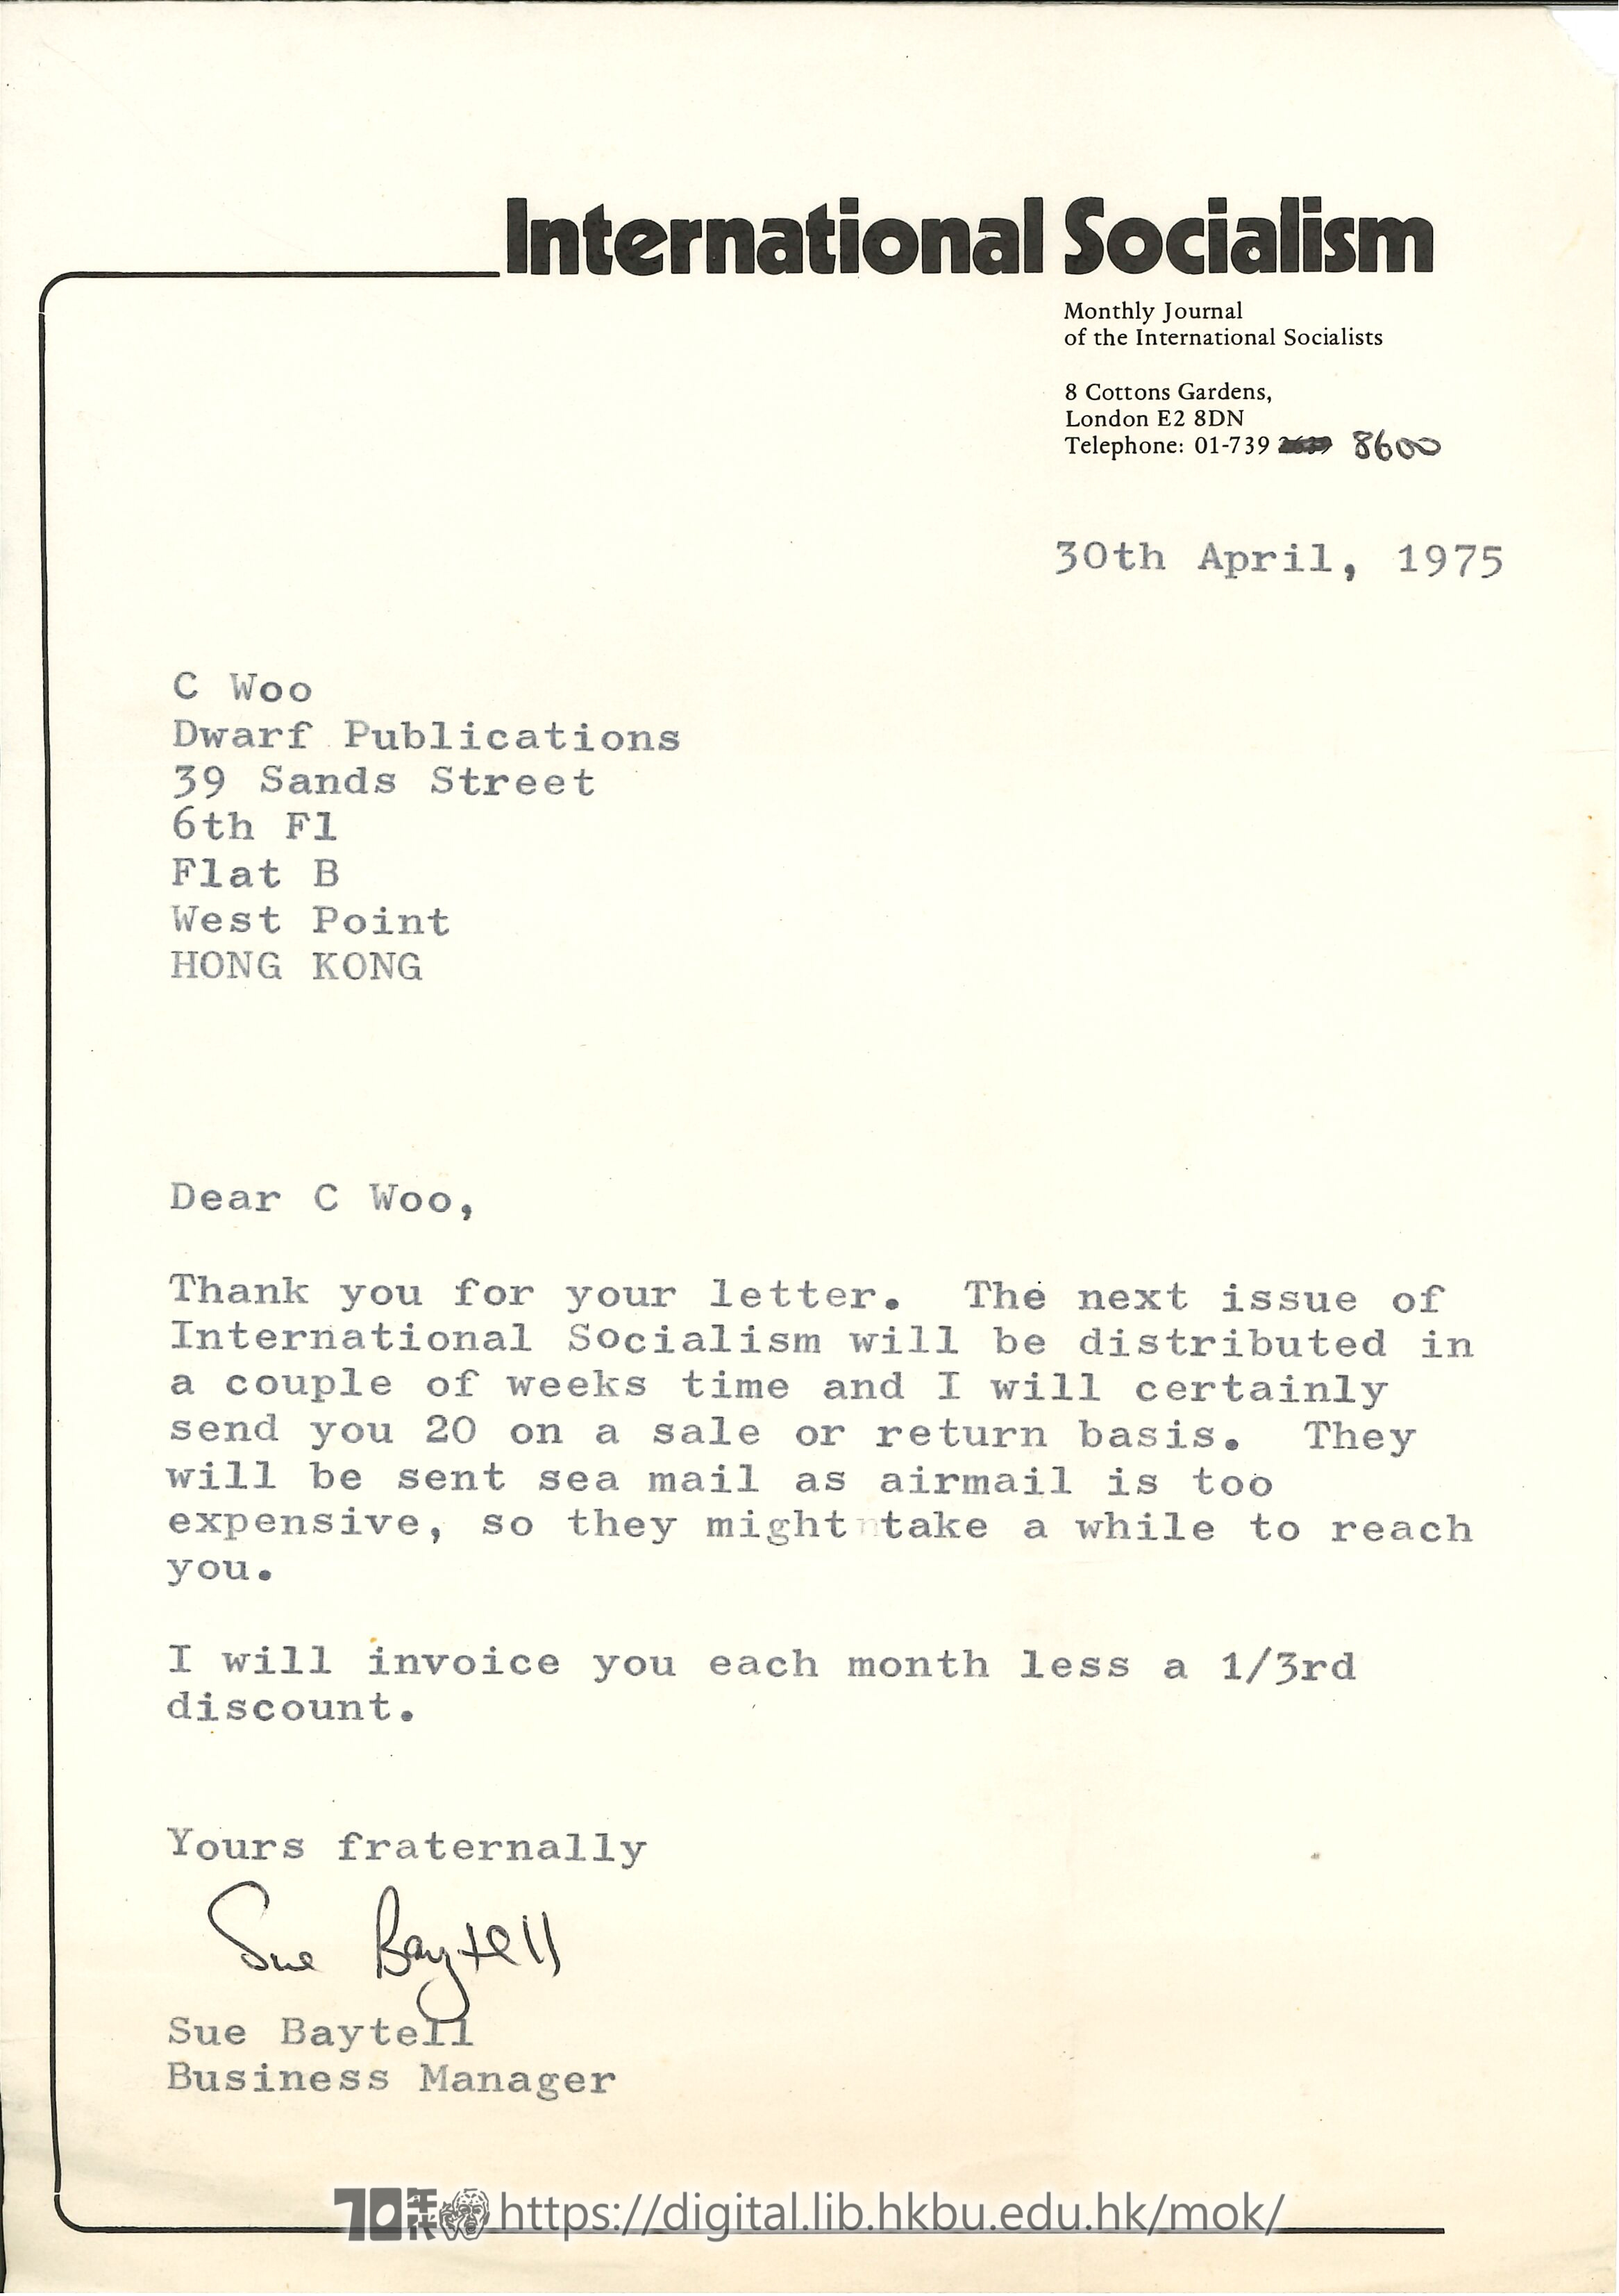   Letter from Sue Baytell to C. Woo BAYTELL, Sue 